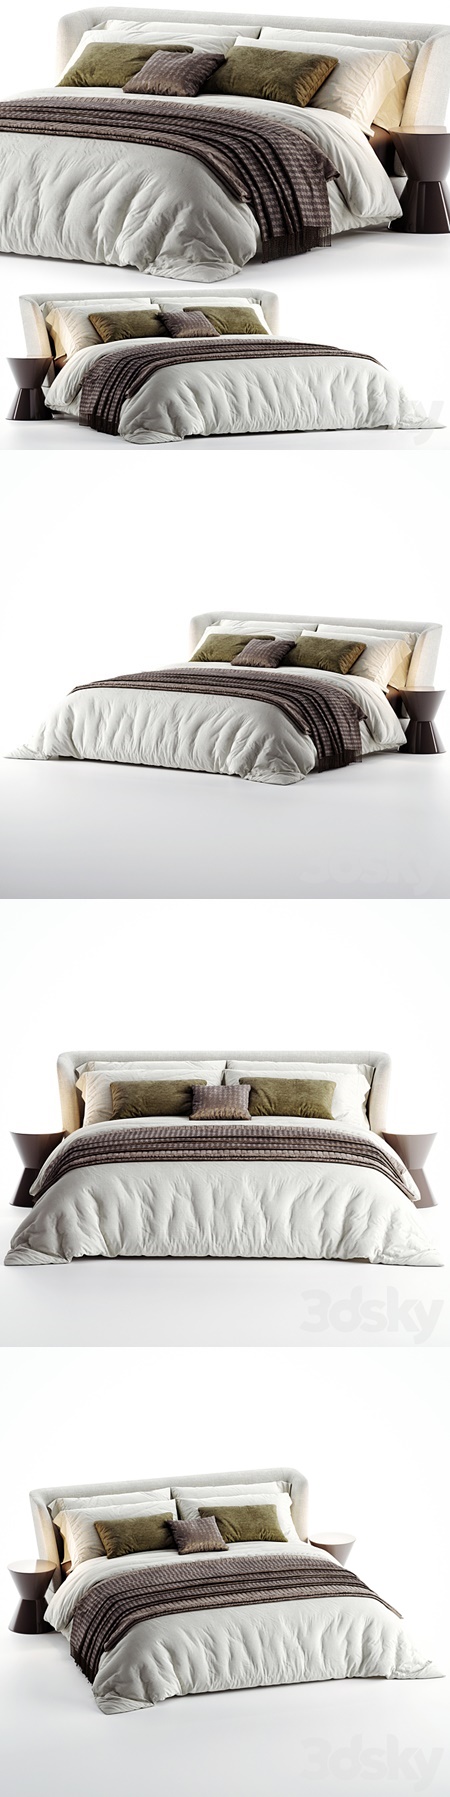 Bed Minotti Reeves (Creed)